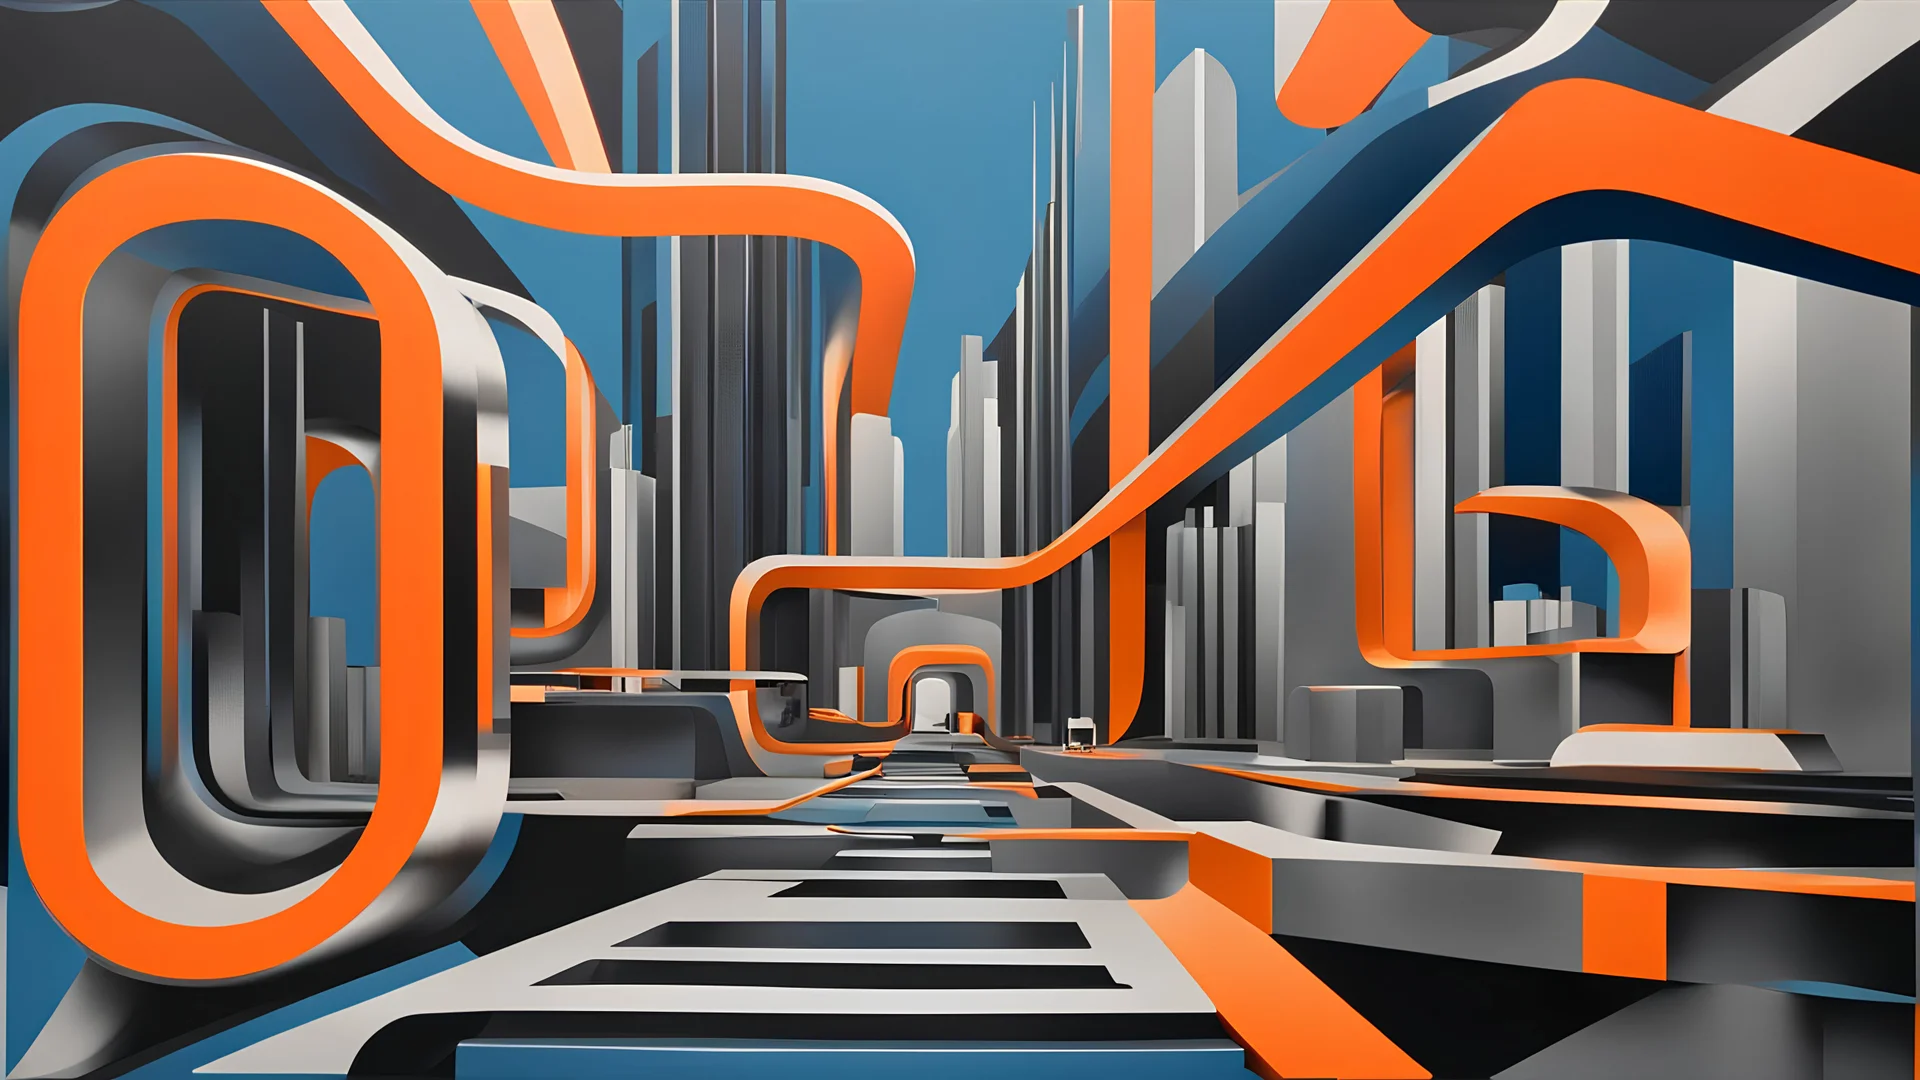 (hustle and bustle:55), loop kick, (deconstruct:28), retro futurism style, urban canyon, centered, drone view, great verticals, great parallels, hard edge, colors of metallic orange and metallic steel blue